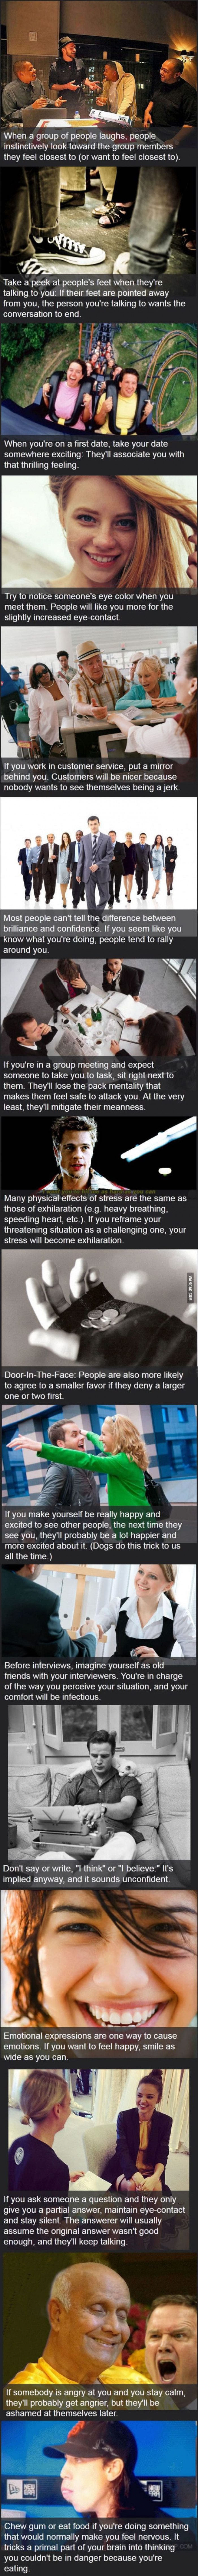 16 Useful Mental Life Hacks You Have To Try